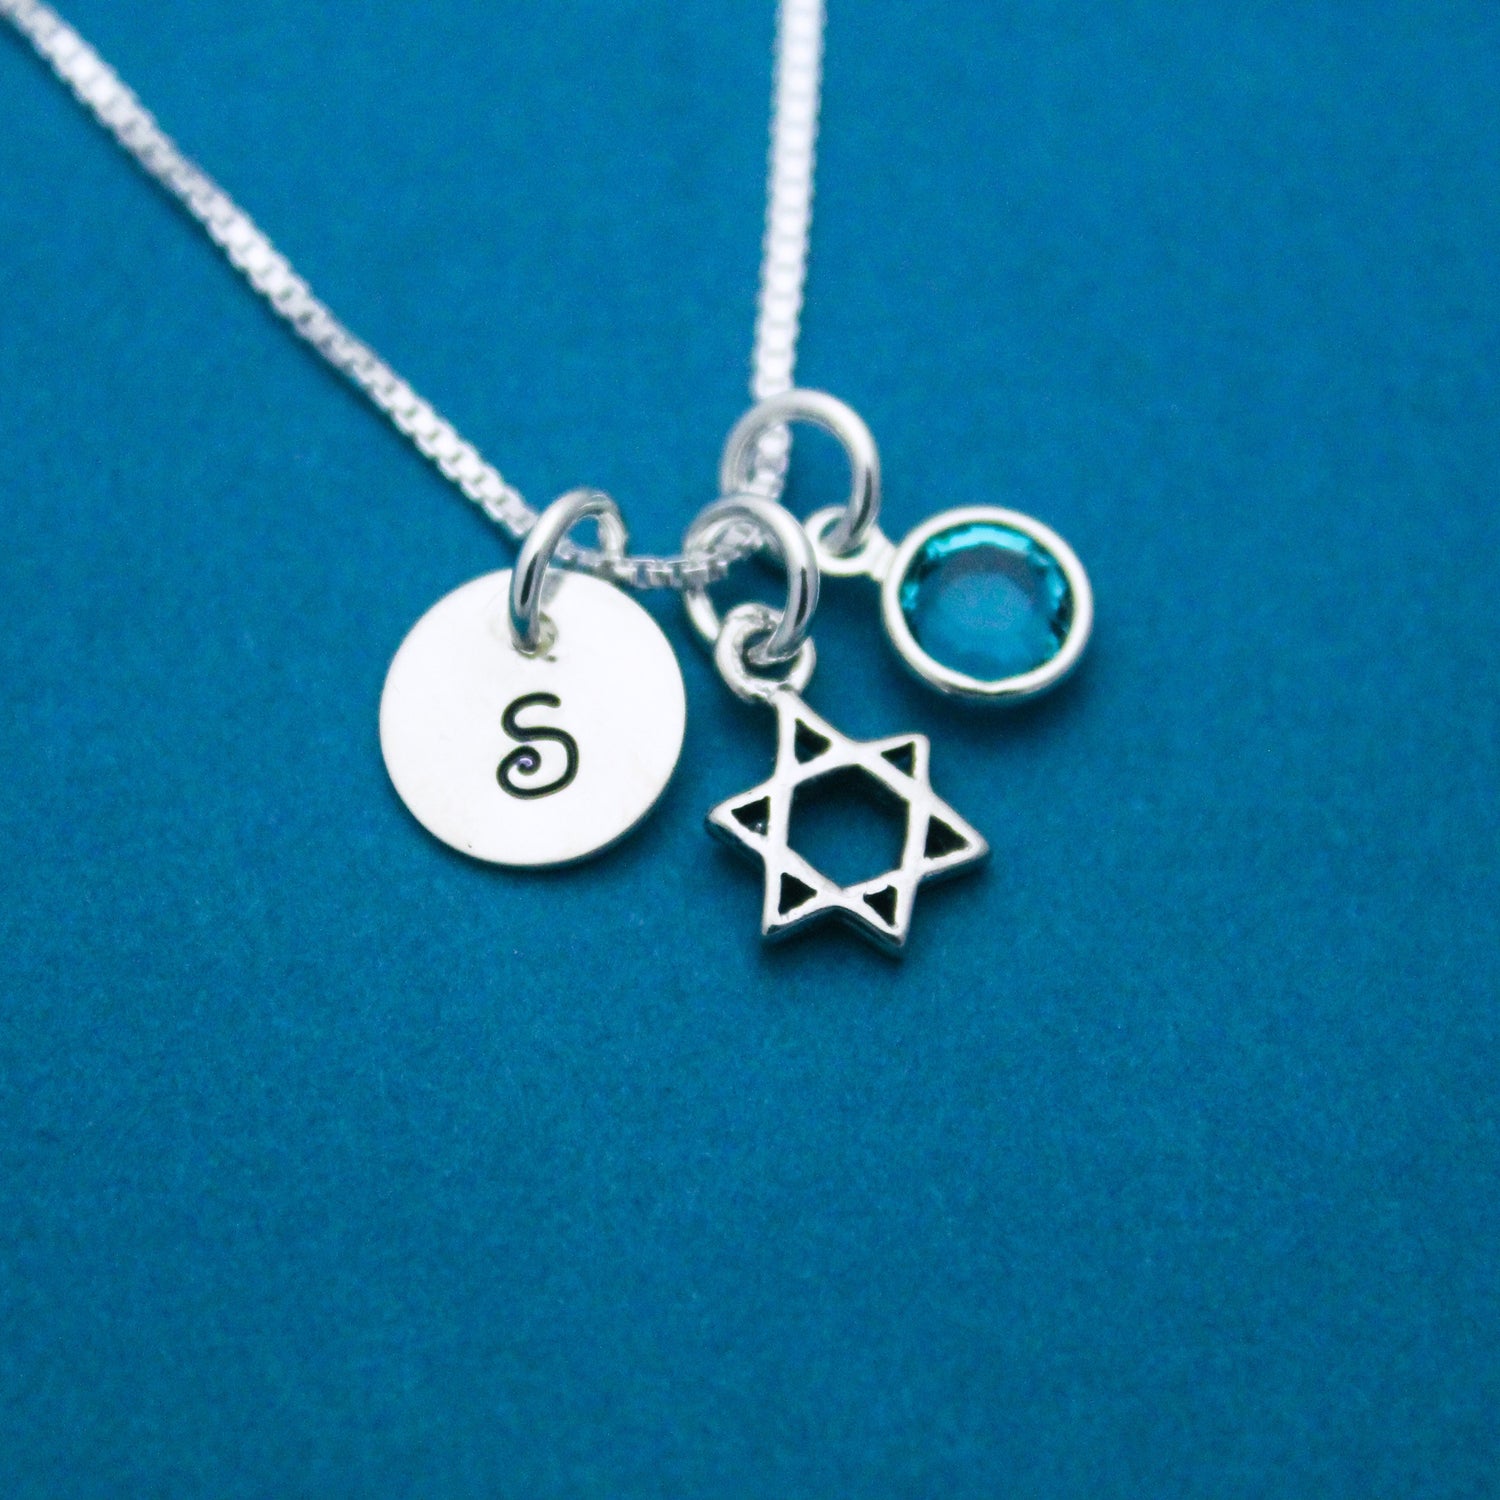 Star of David Charm Necklace for Bat Mitzvah  Personalized Sterling Silver Hand Stamped Jewelry